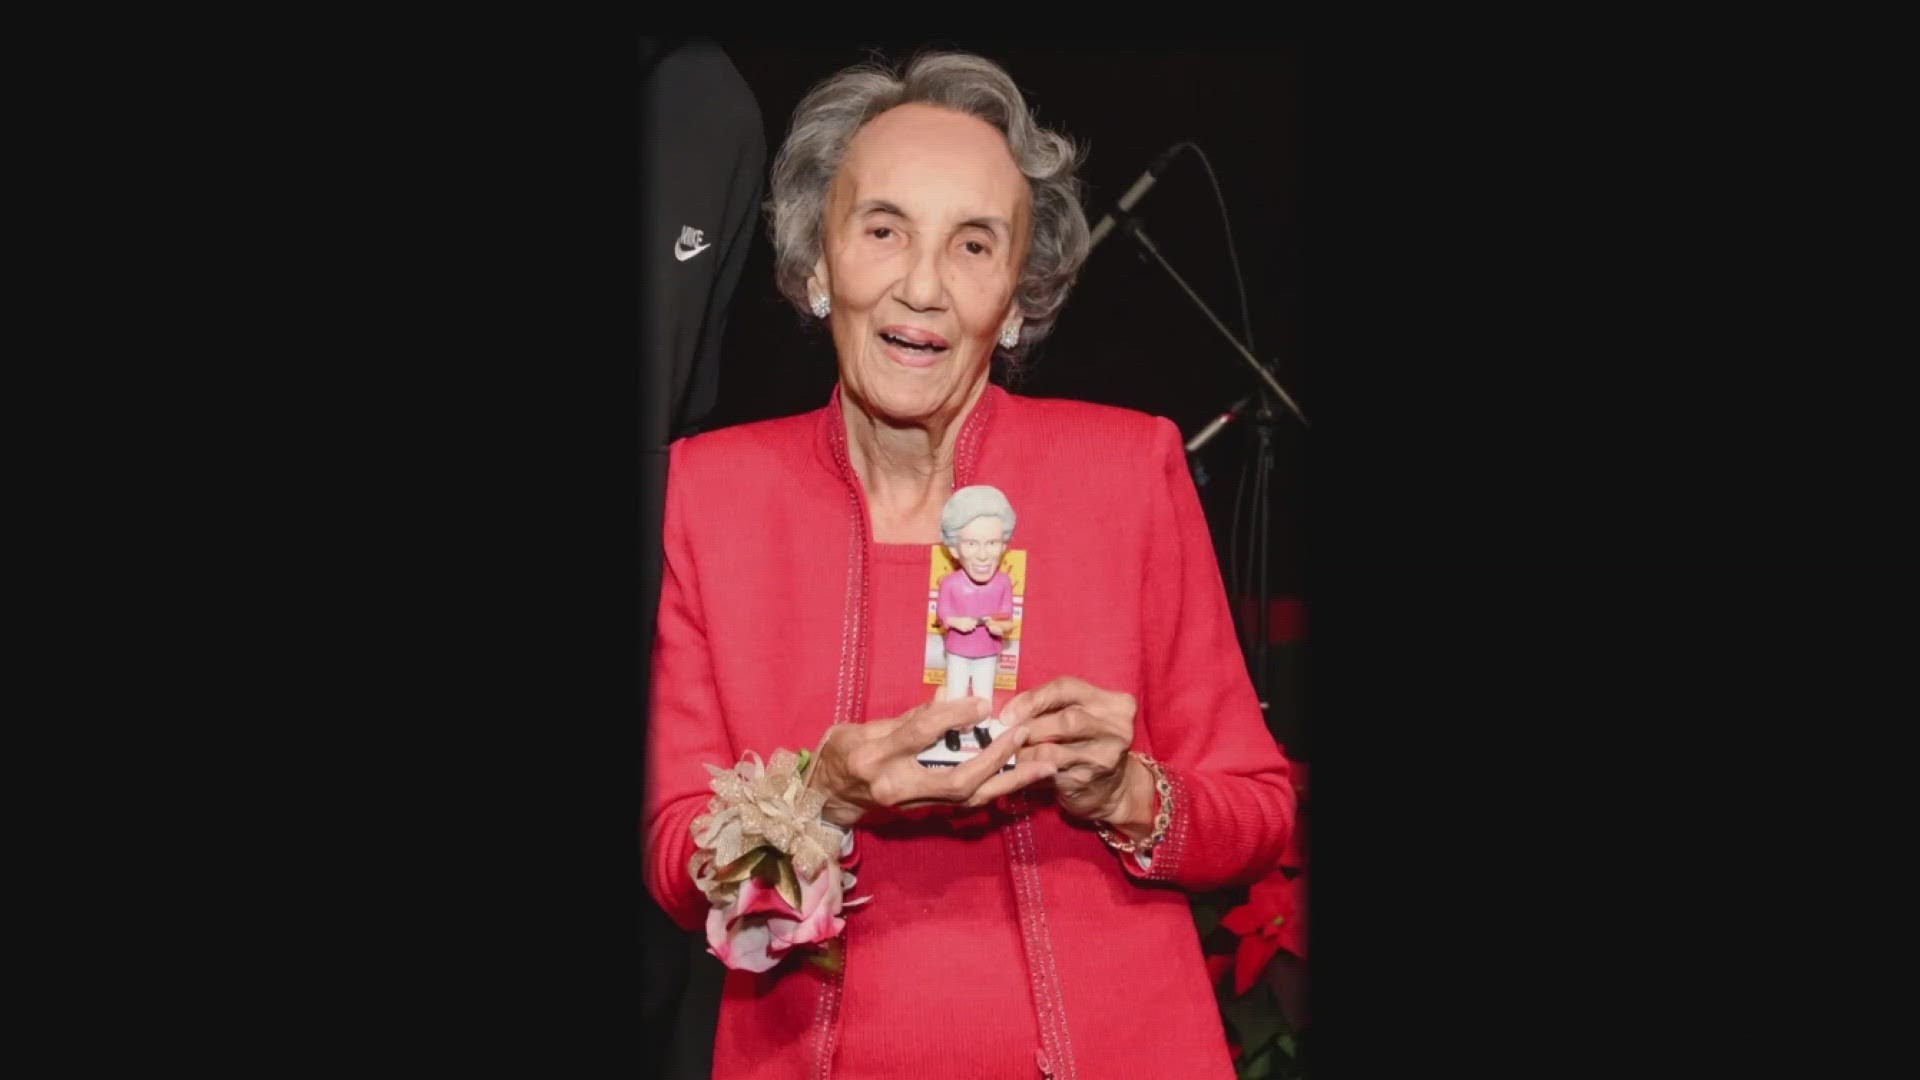 Honored with HER very own bobblehead: Virginia Ali, co-founder of the immortal Ben's Chili Bowl.
Ms. Ali recently turned 90.